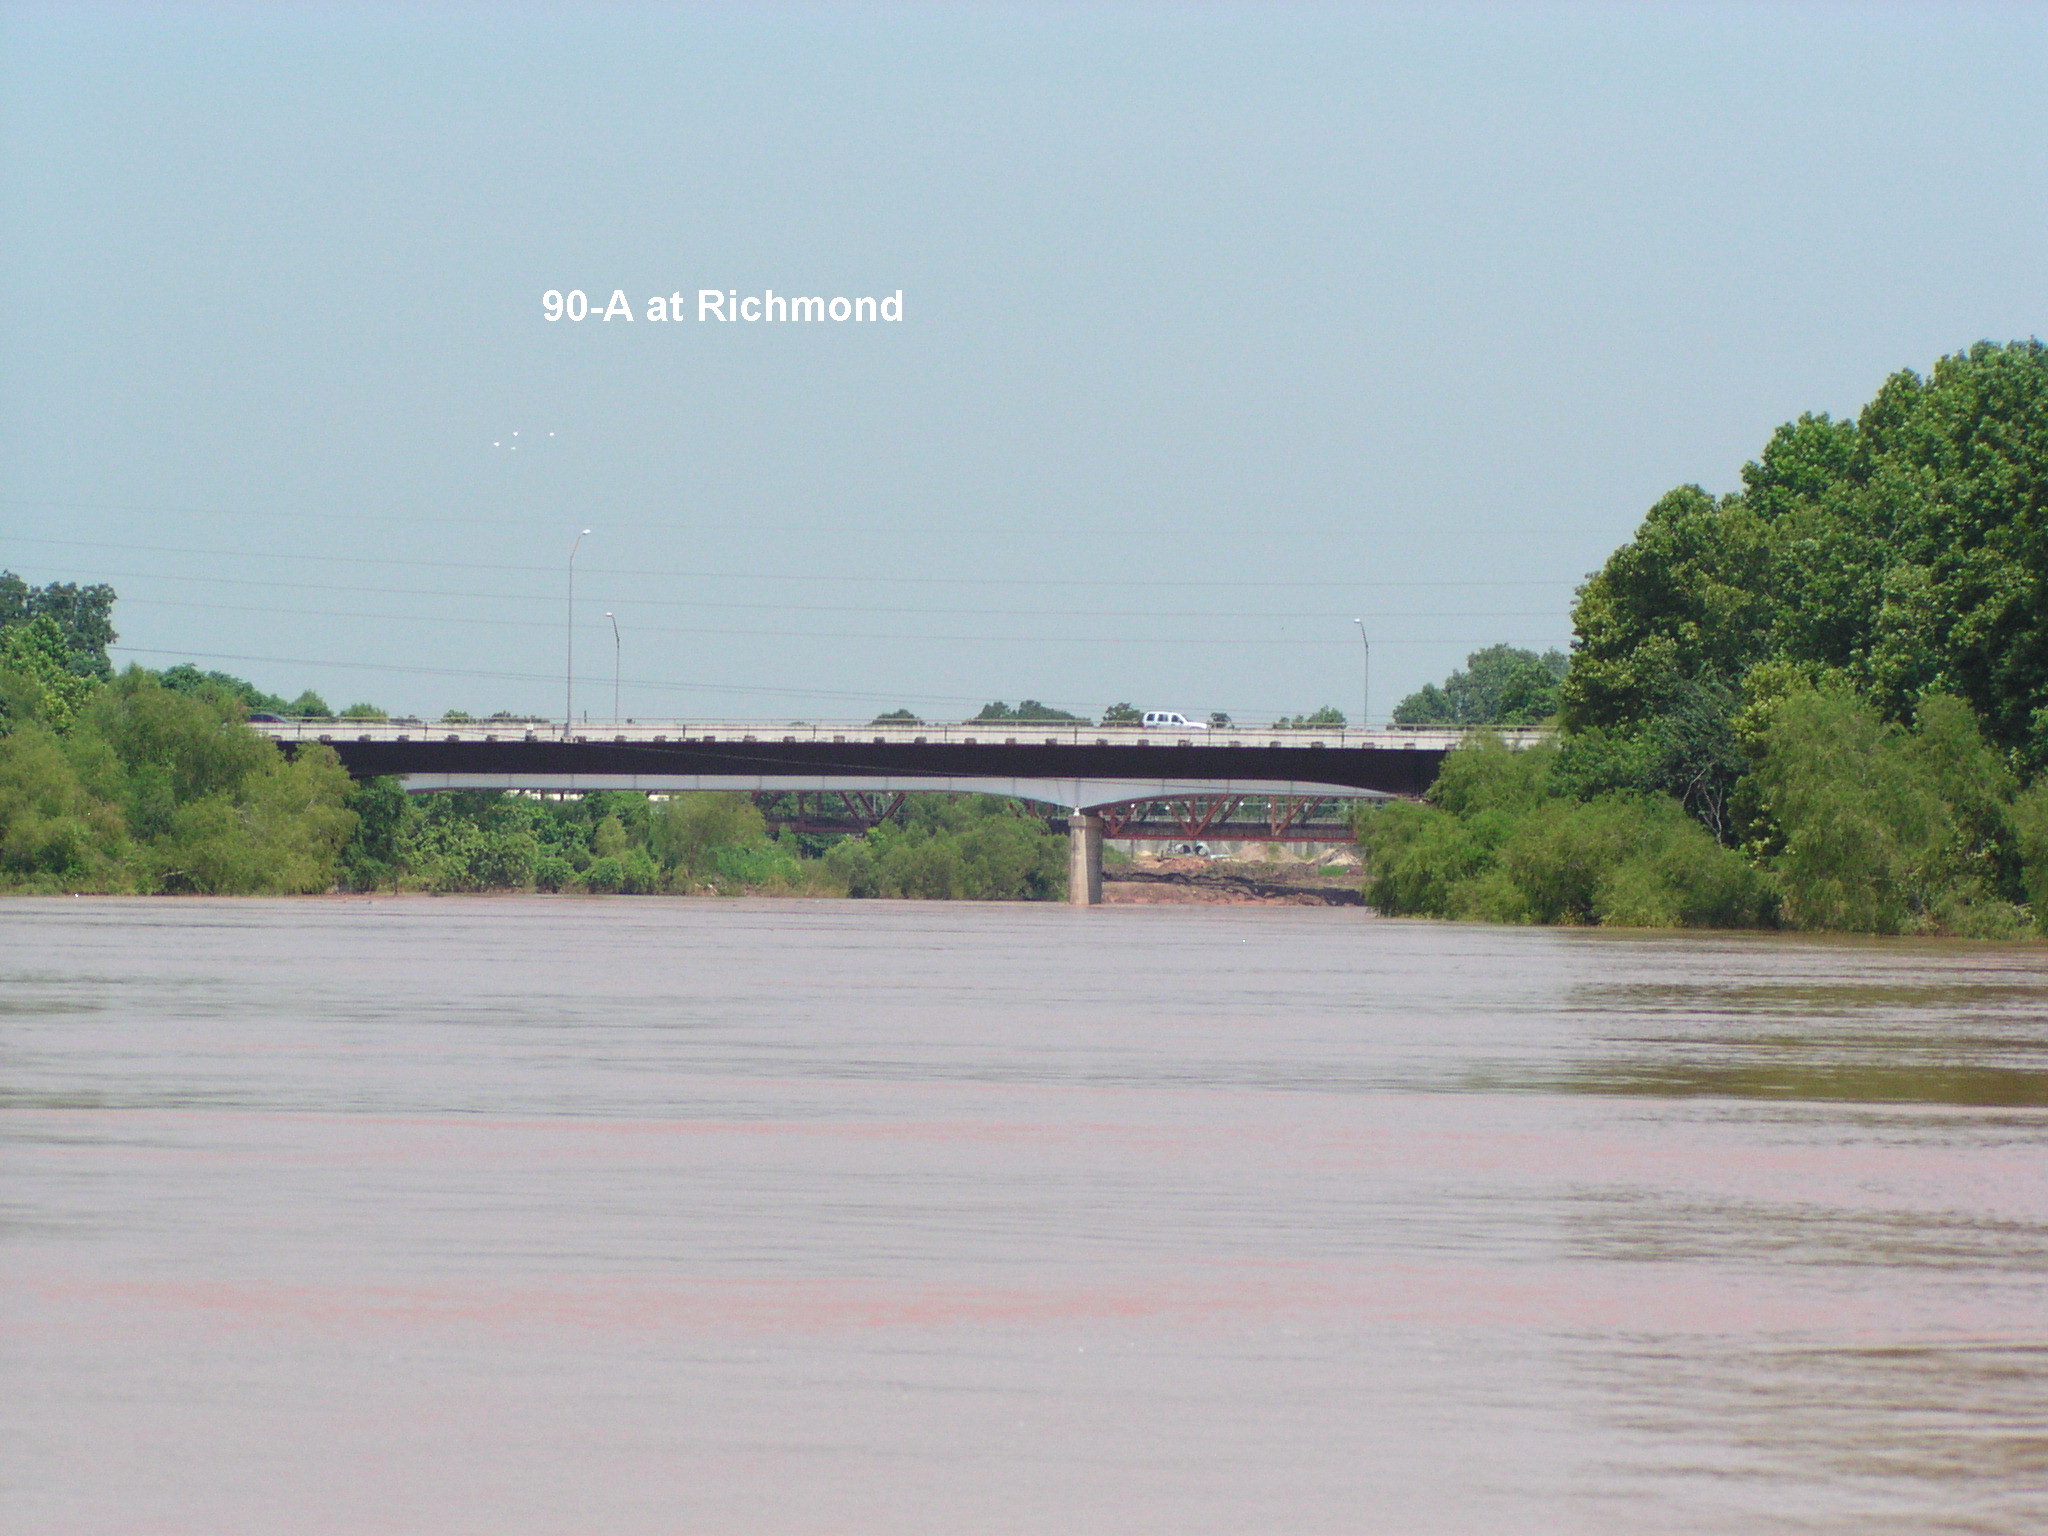 The railroad, hidden behind  90A, Was the first RR in Texas. The steam engines went down the bank, across a barge and up the other bank in the 1850's.